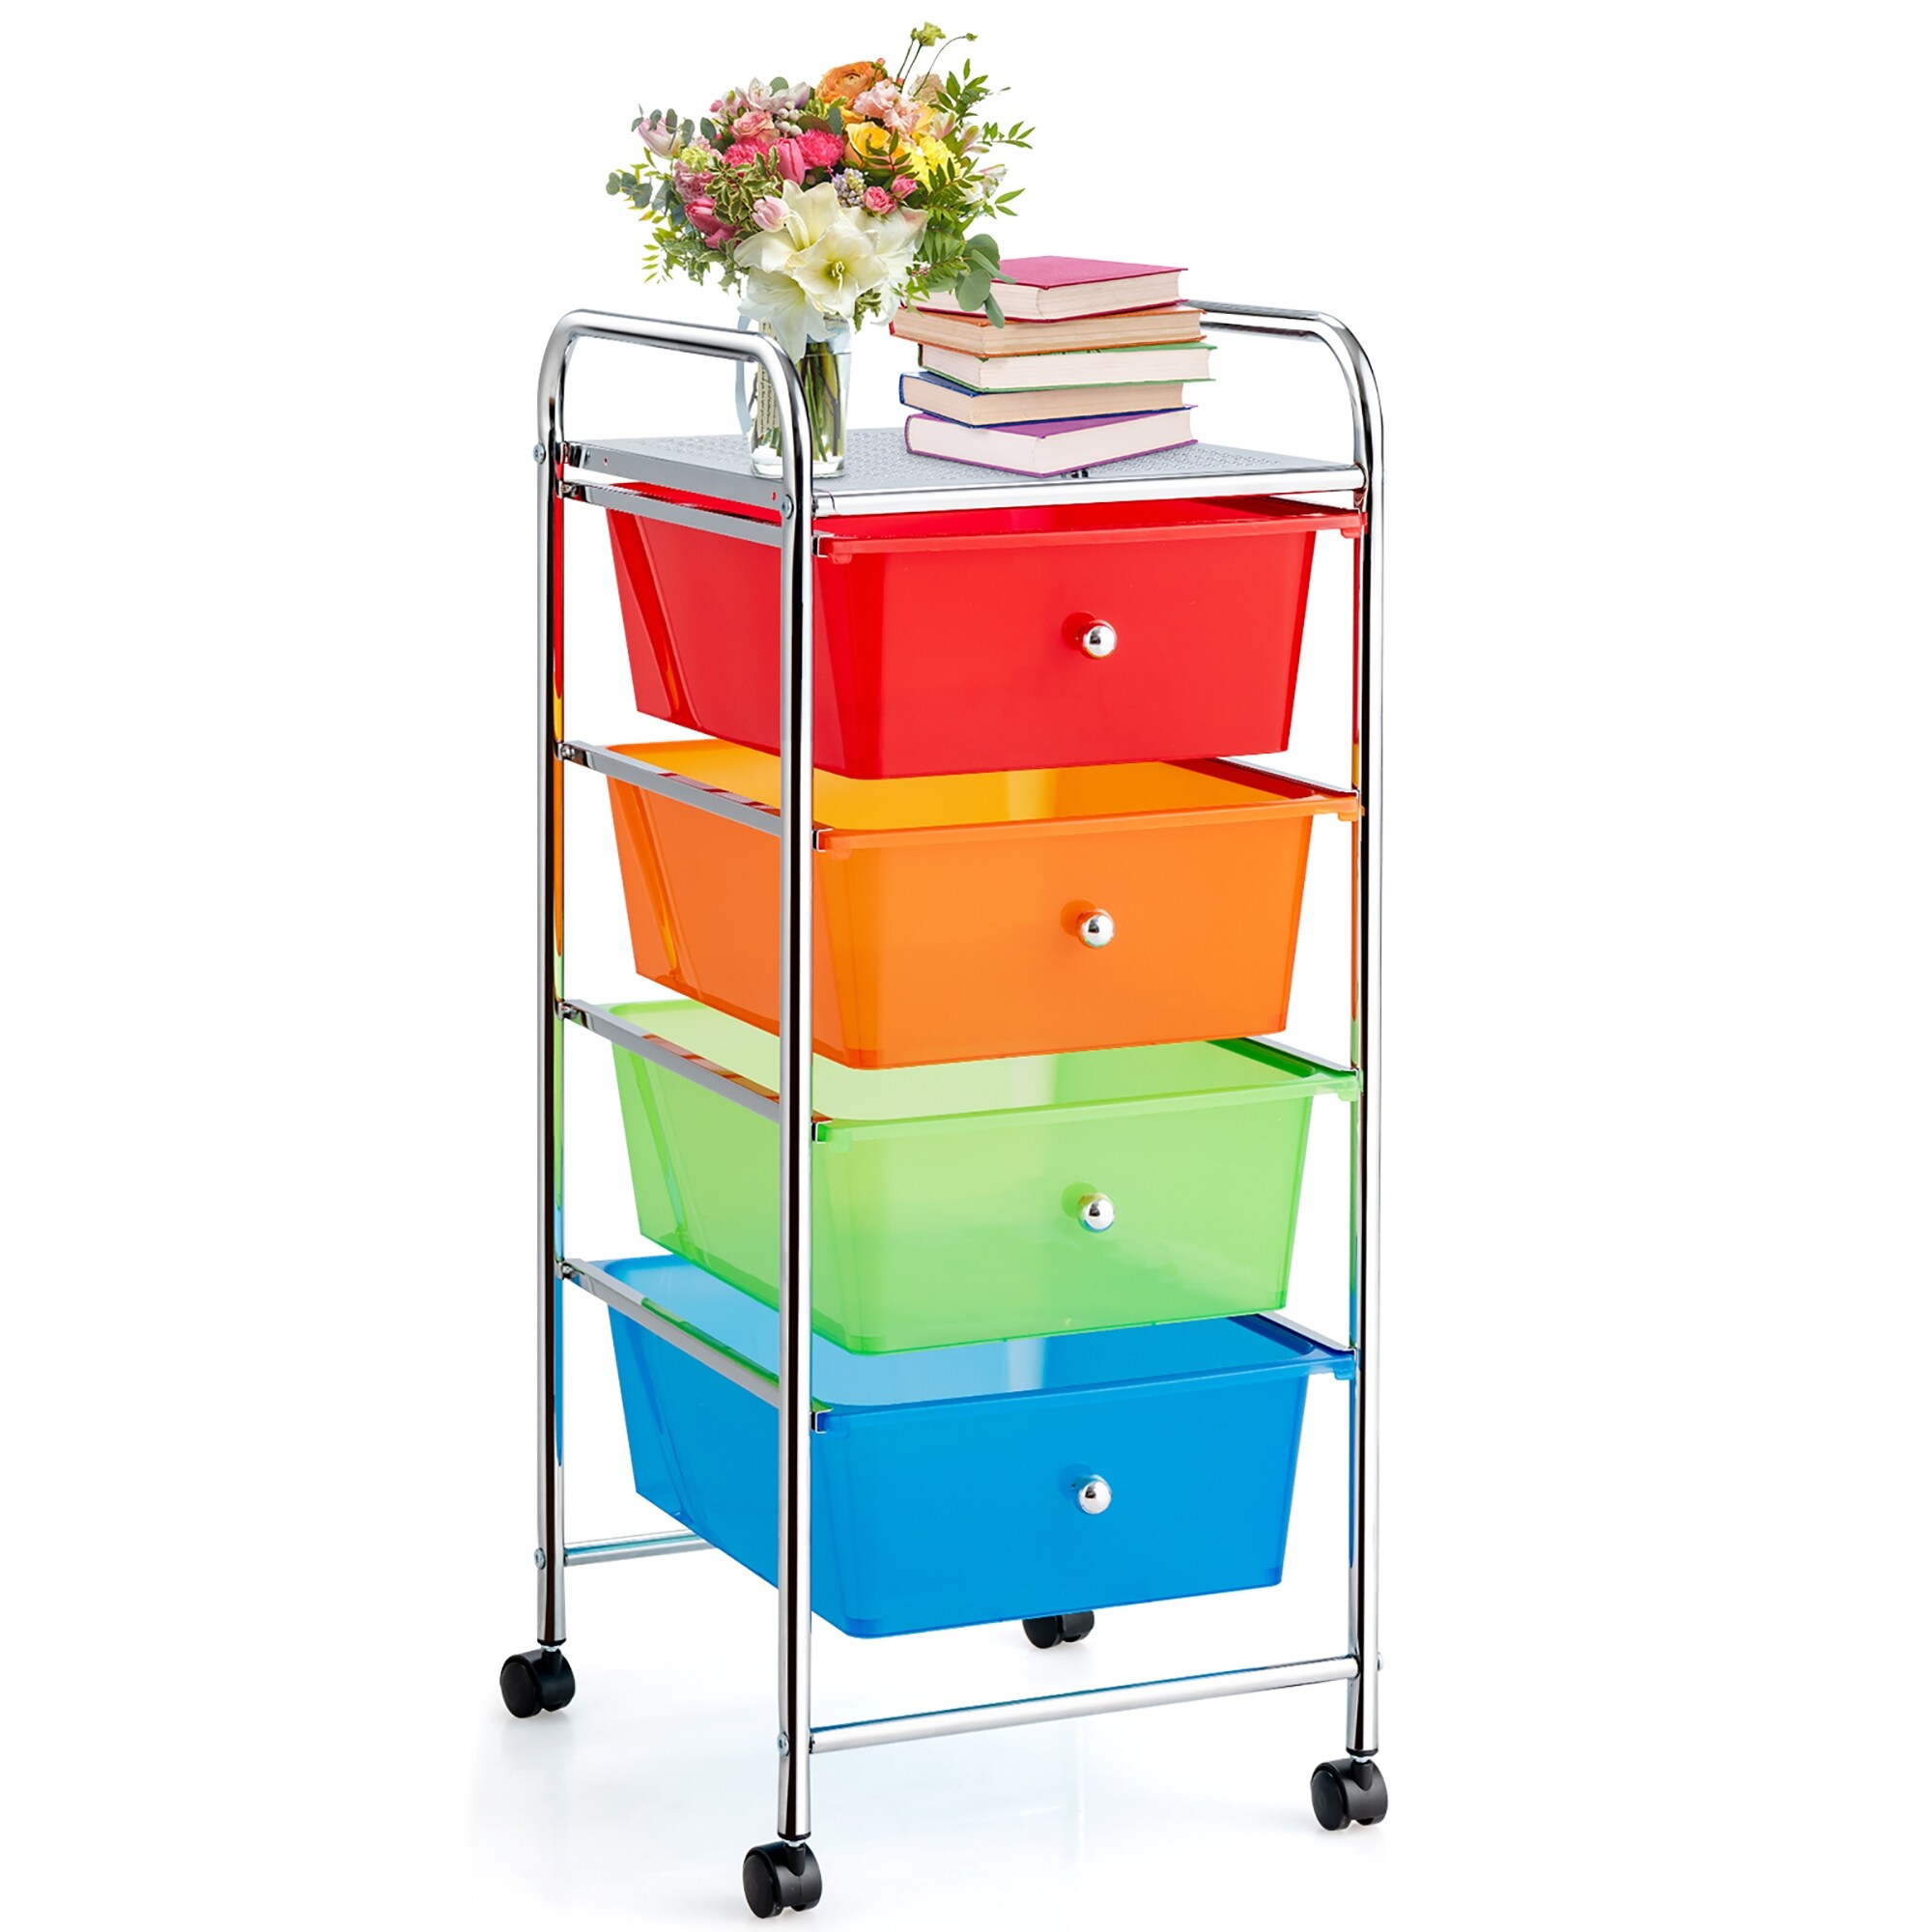 https://ak1.ostkcdn.com/images/products/is/images/direct/1e96a3ebc60b12f9efbd9a6bbfe6260ed37c00f6/4Tier-Rolling-Storage-Cart-4-Drawer-Mobile-Organizer-Cart-with-Casters.jpg